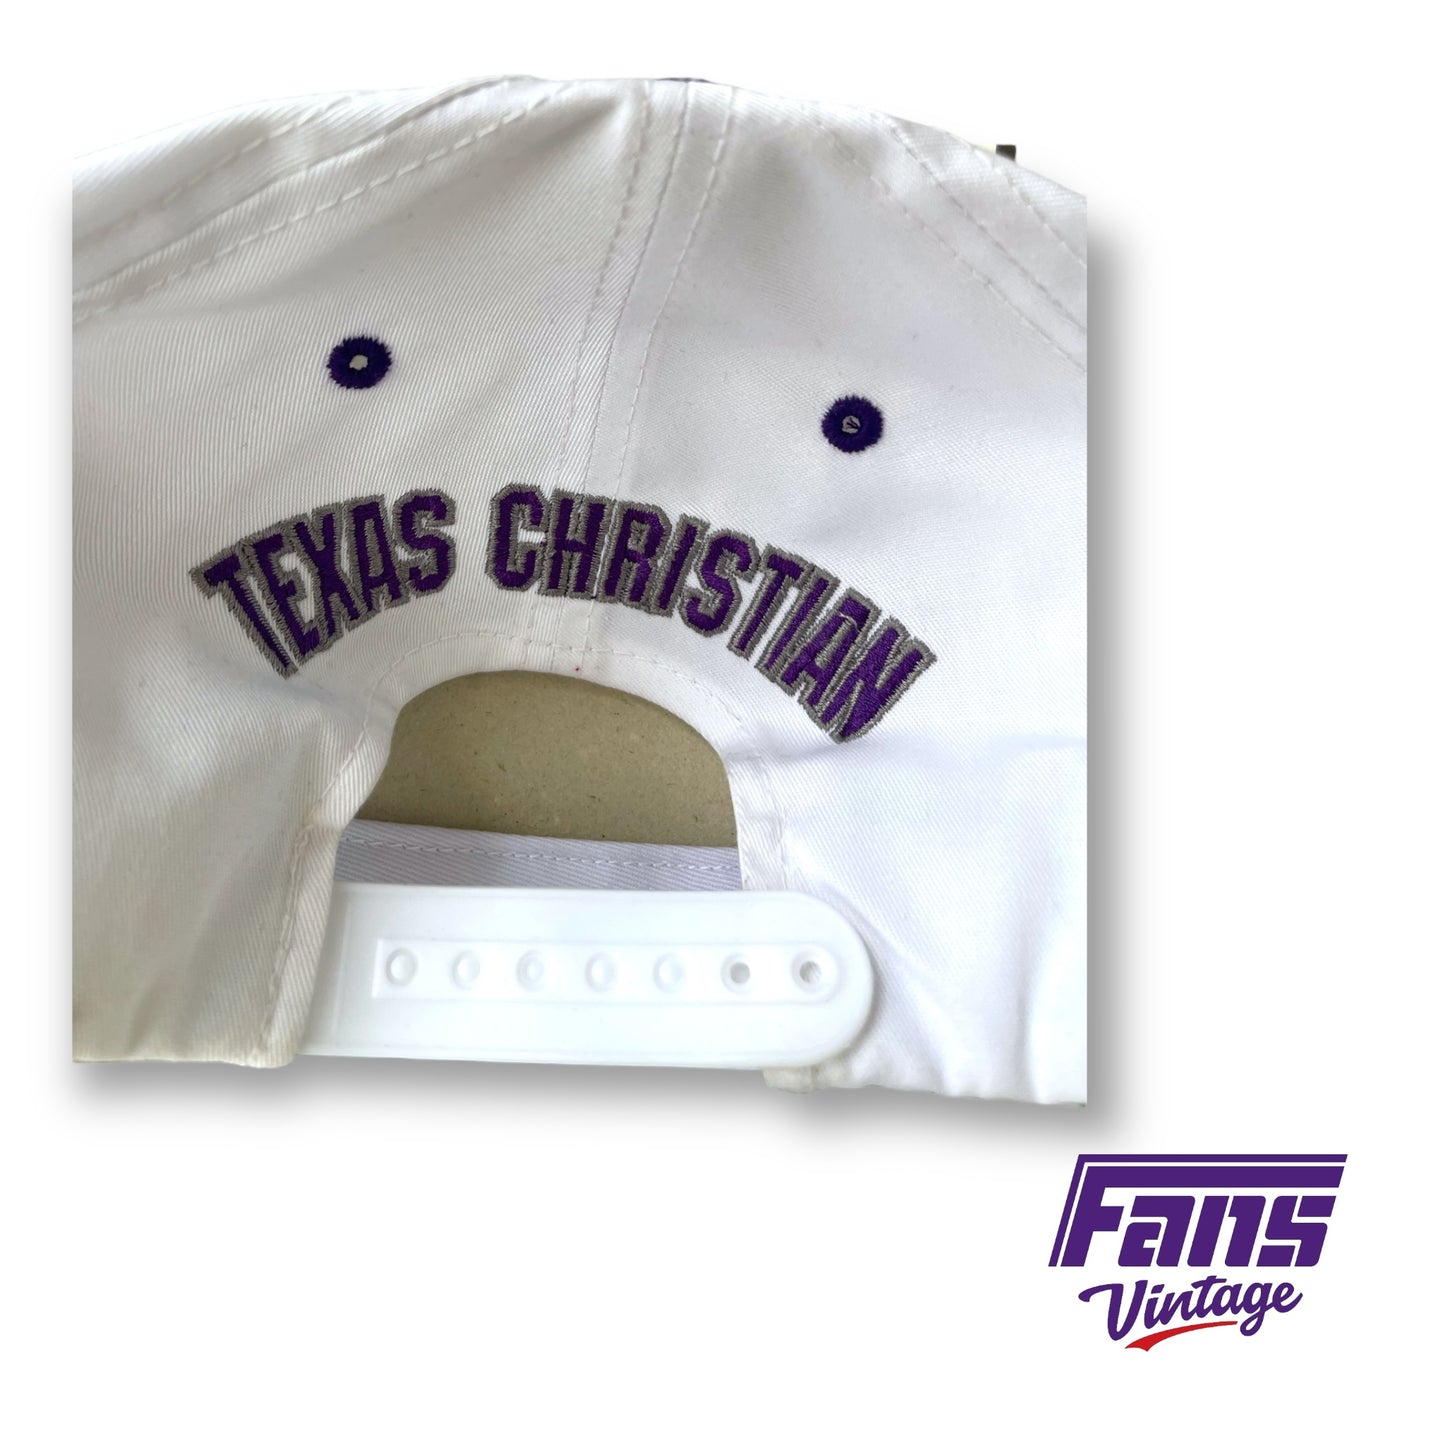 GRAIL 90s Vintage TCU Snapback Hat with Centennial Logo - New with Original Tags!